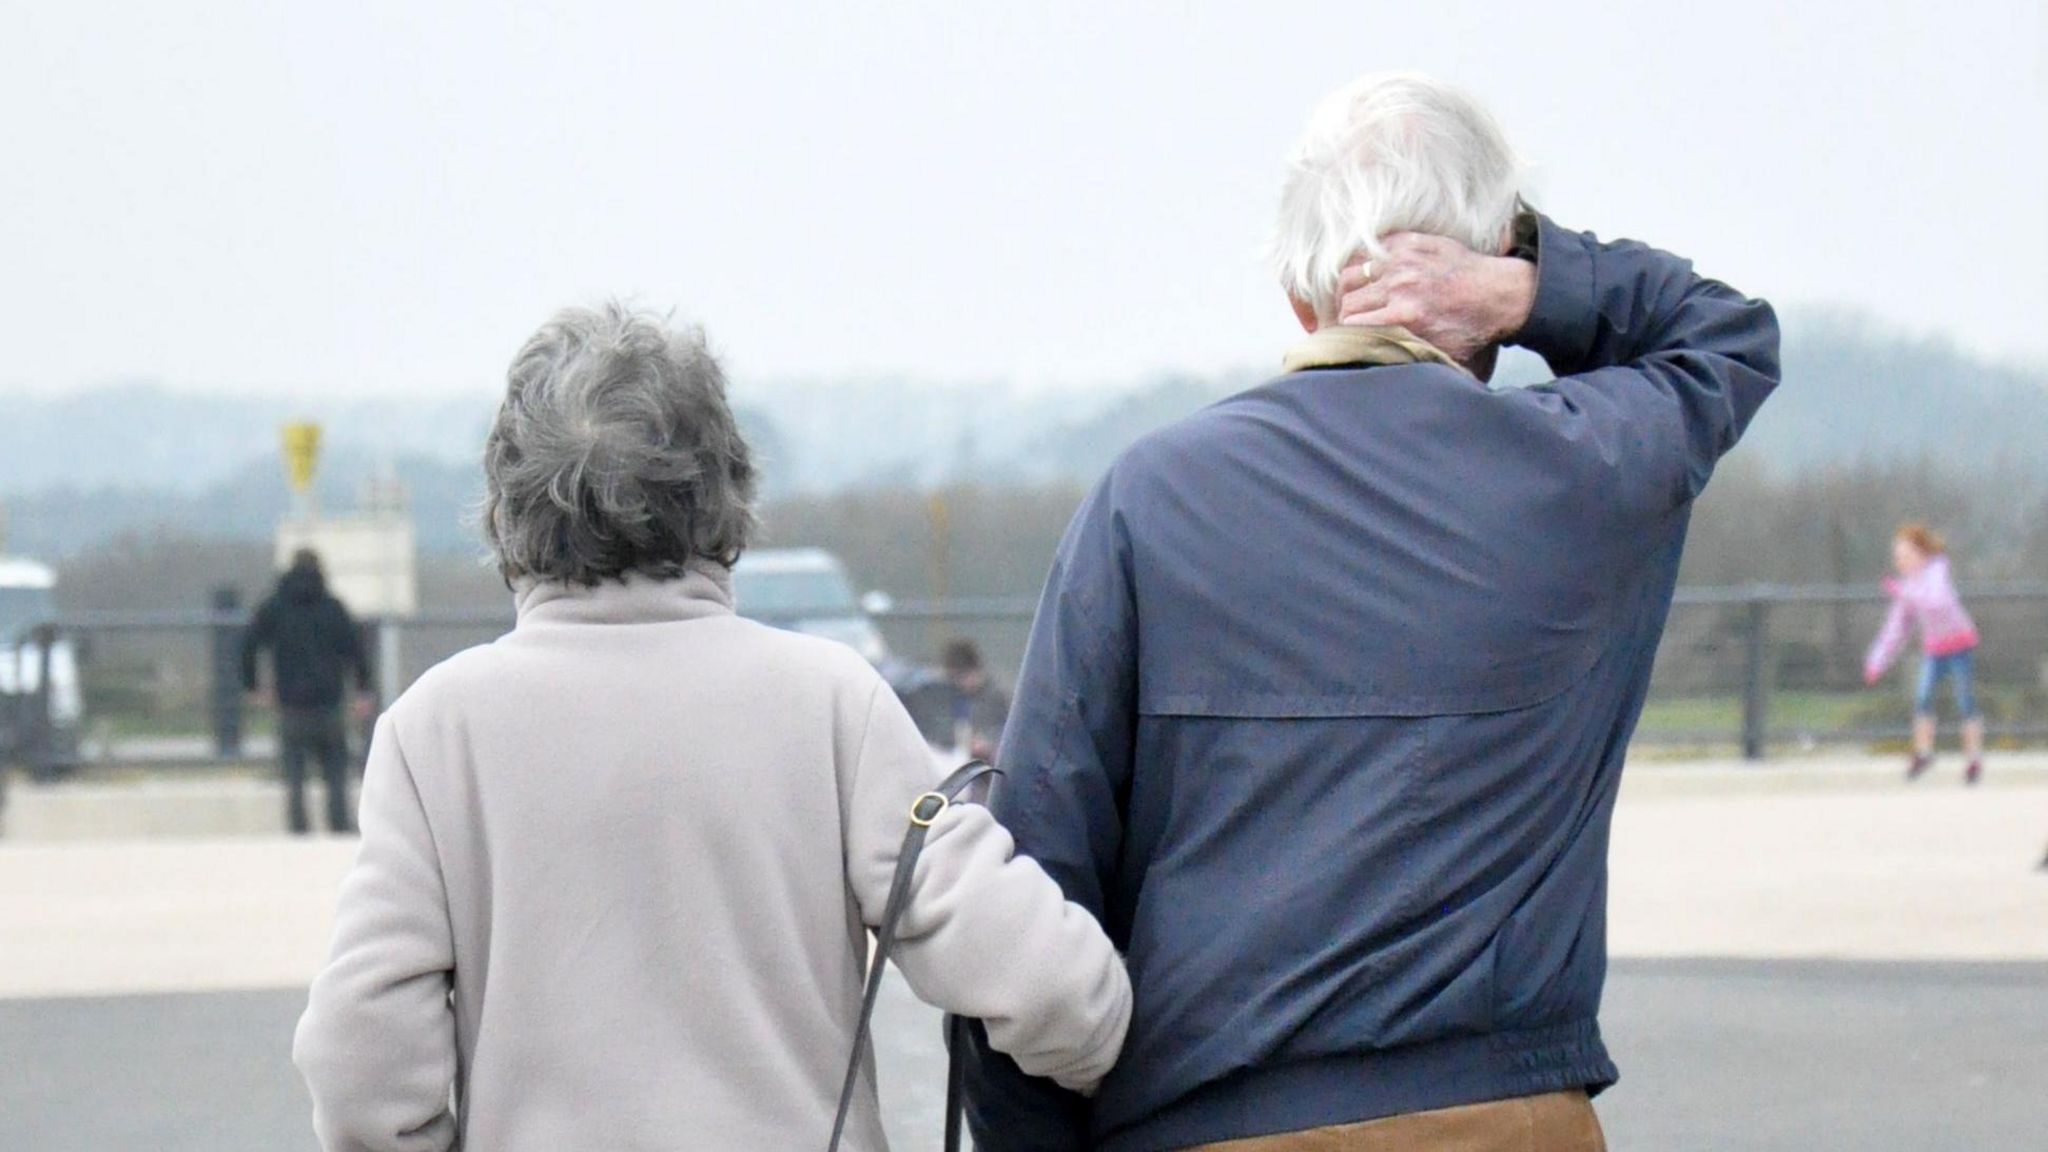 Two elderly people walking side by side. One on the left in a grey jumper, the one of the right in a blue jumper. Both are walking away.